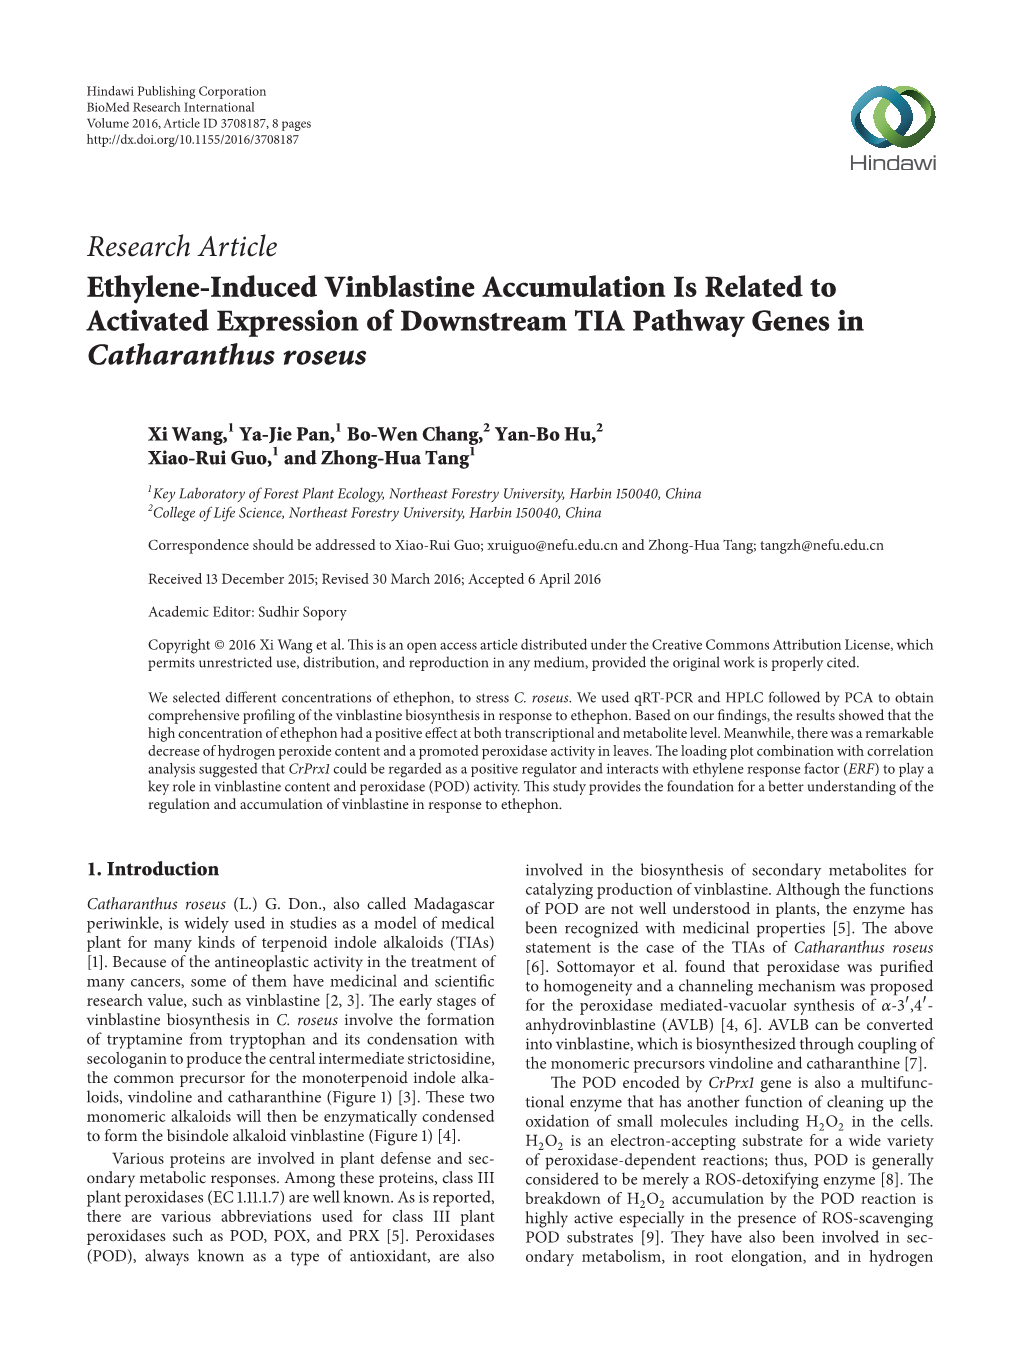 Ethylene-Induced Vinblastine Accumulation Is Related to Activated Expression of Downstream TIA Pathway Genes in Catharanthus Roseus